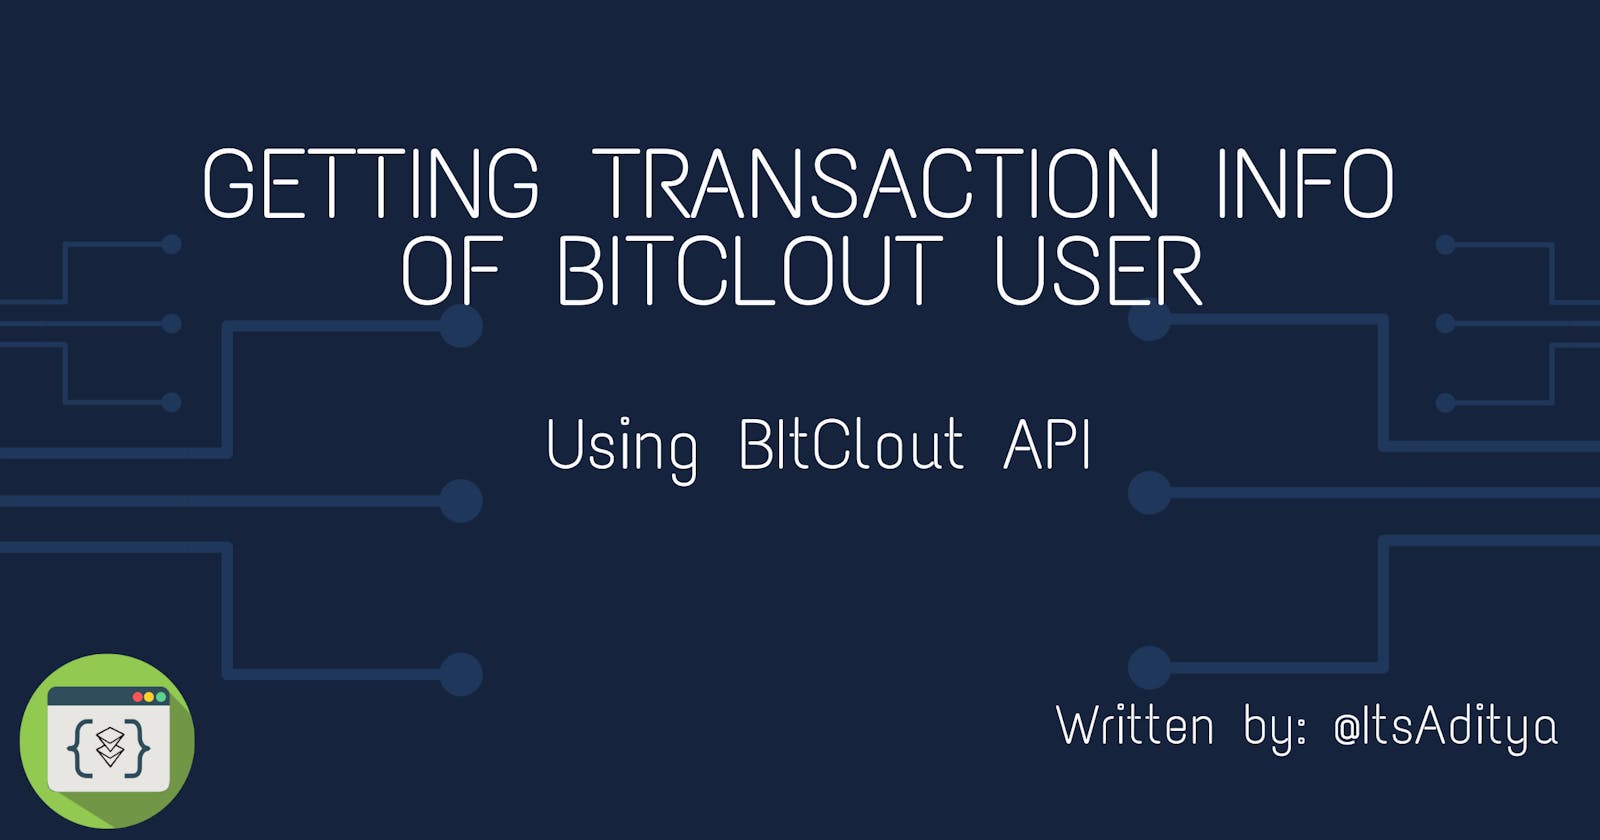 Getting Transaction Info of a BitClout User